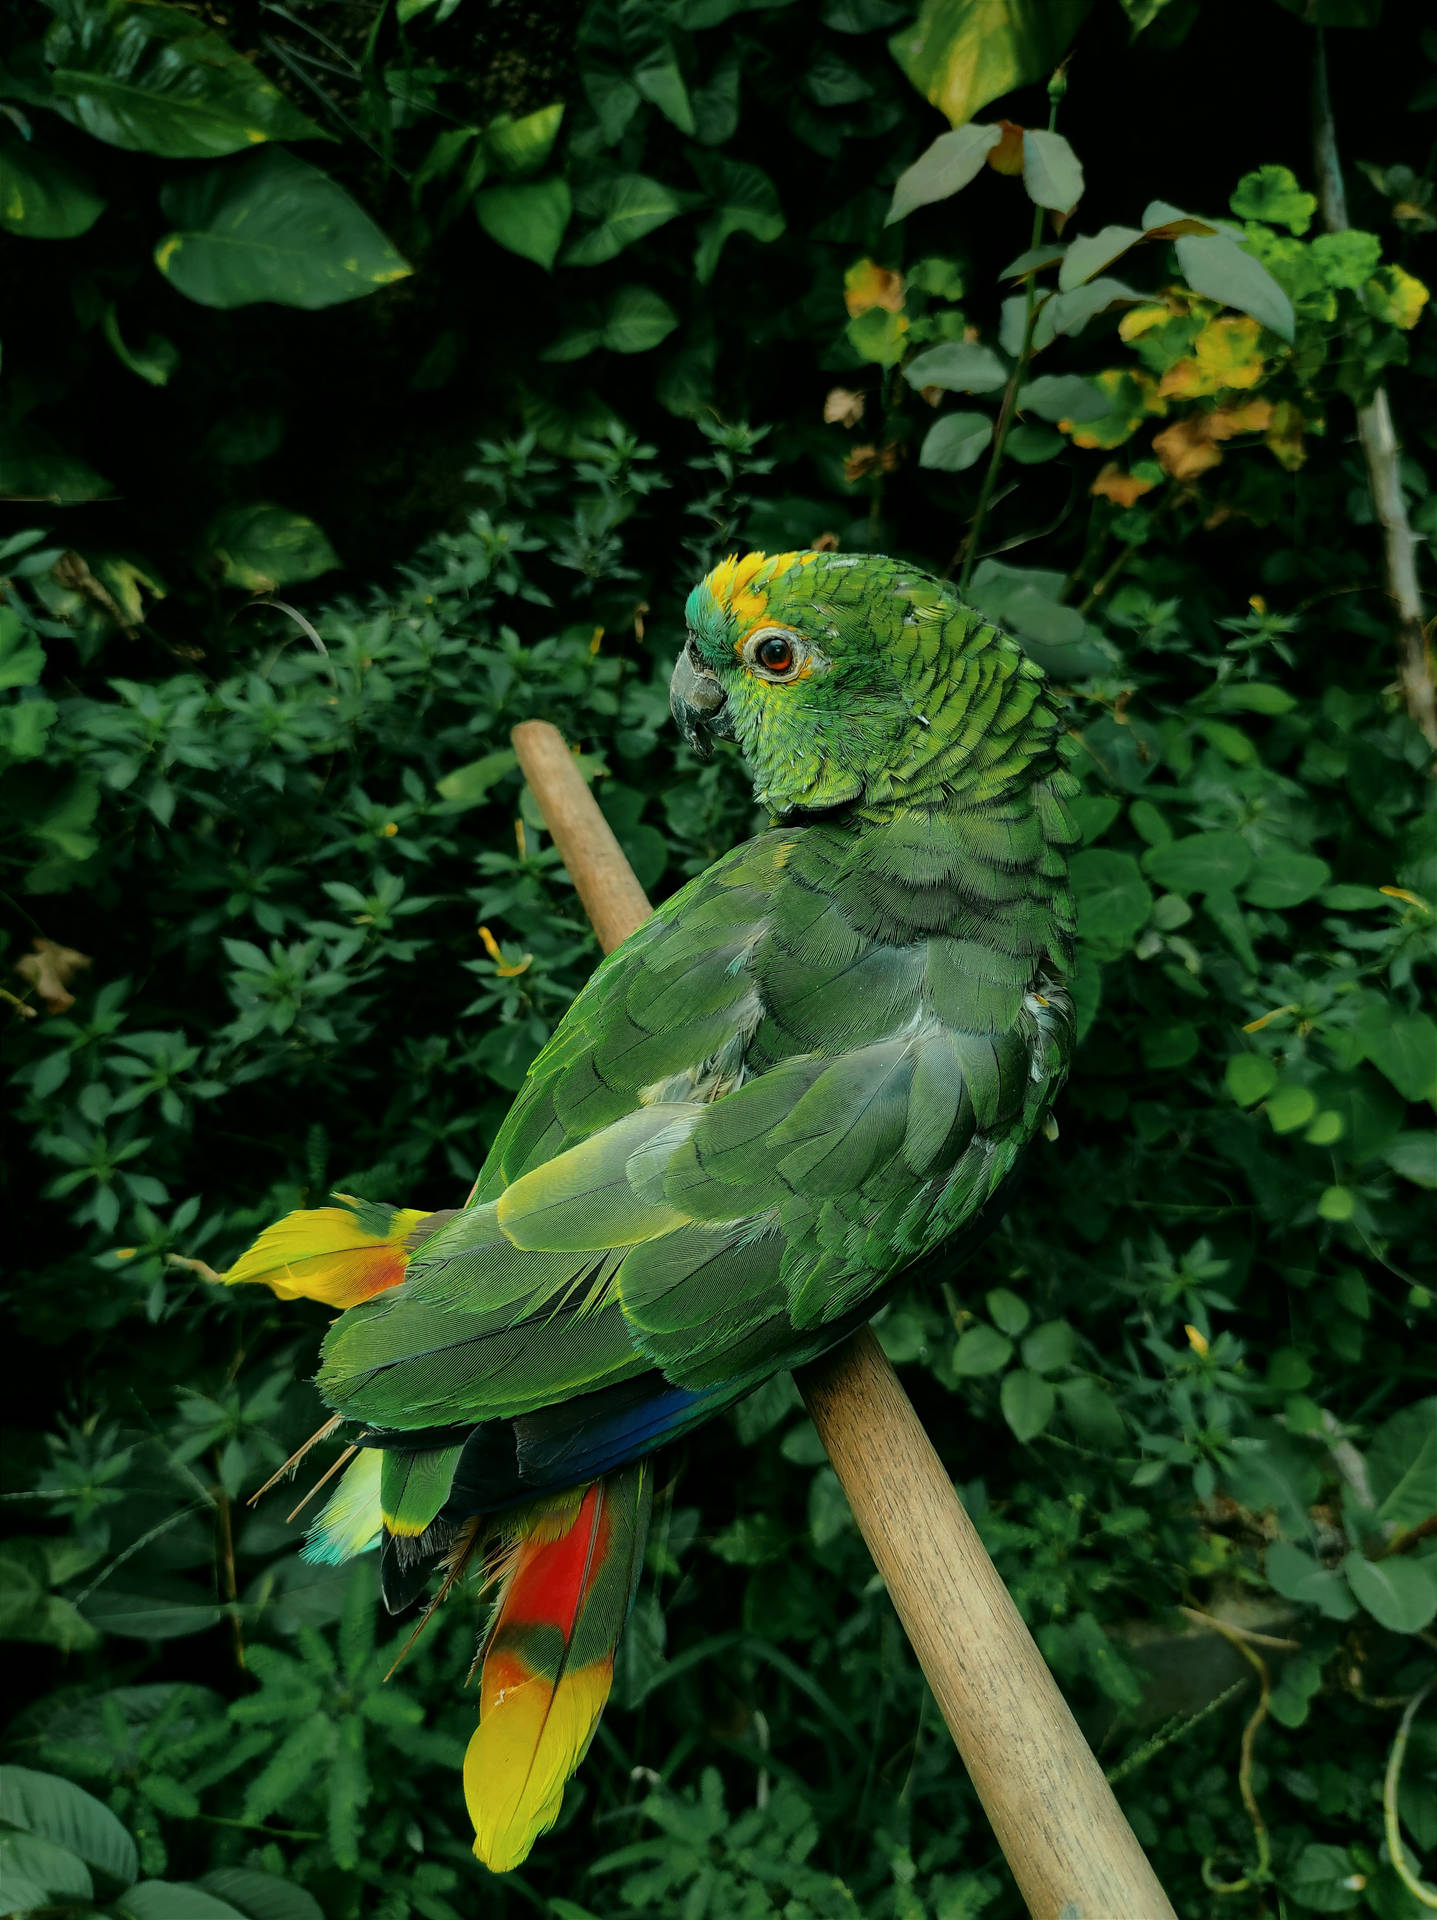 Top 999+ Green Parrot Hd Wallpapers Full HD, 4K✅Free to Use